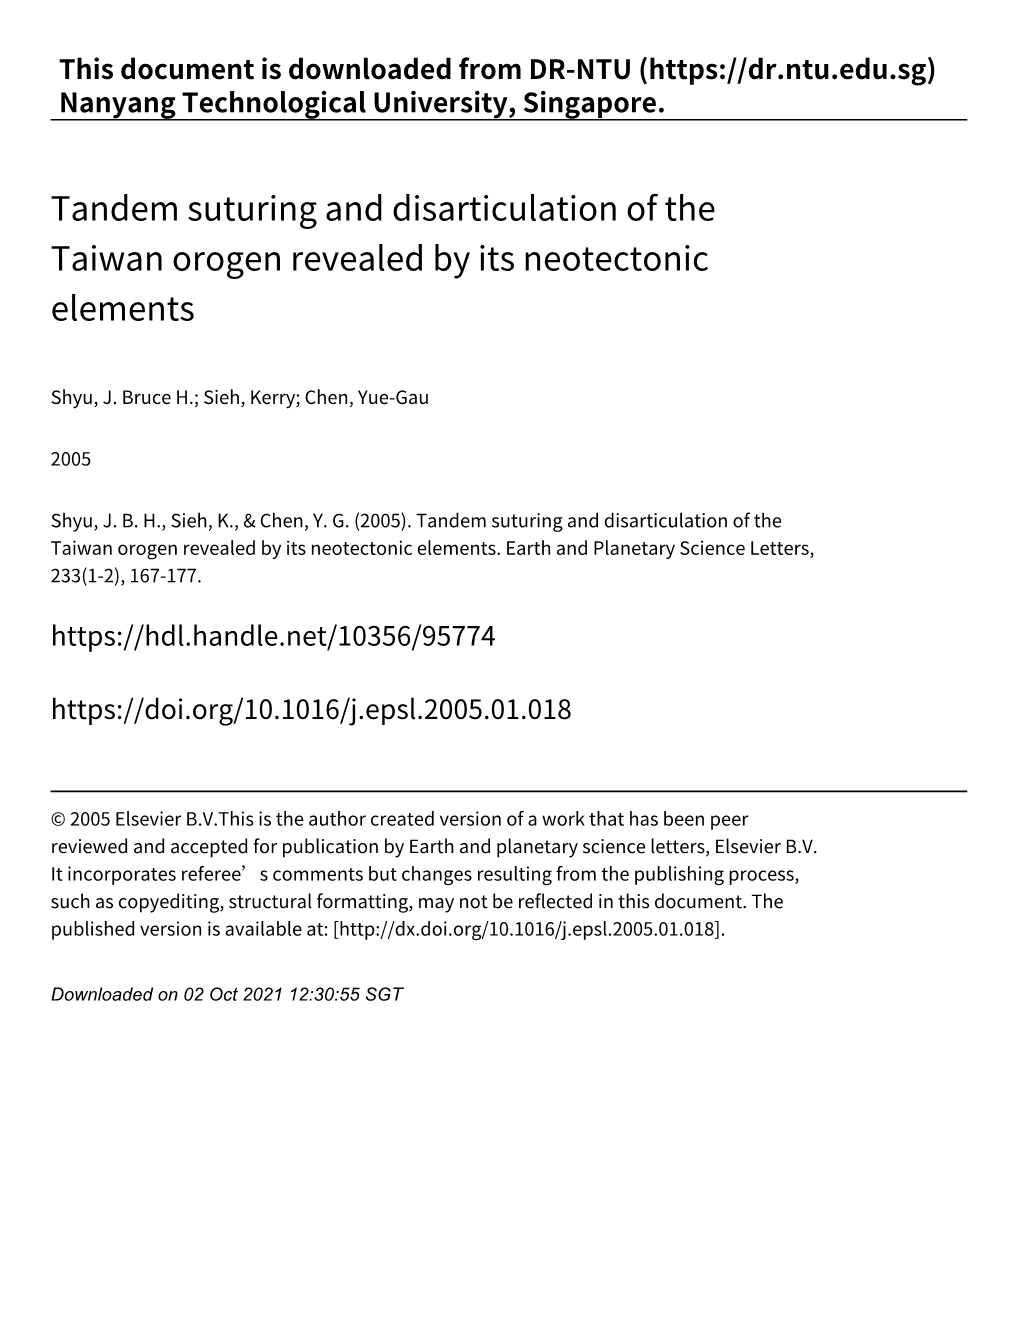 Tandem Suturing and Disarticulation of the Taiwan Orogen Revealed by Its Neotectonic Elements